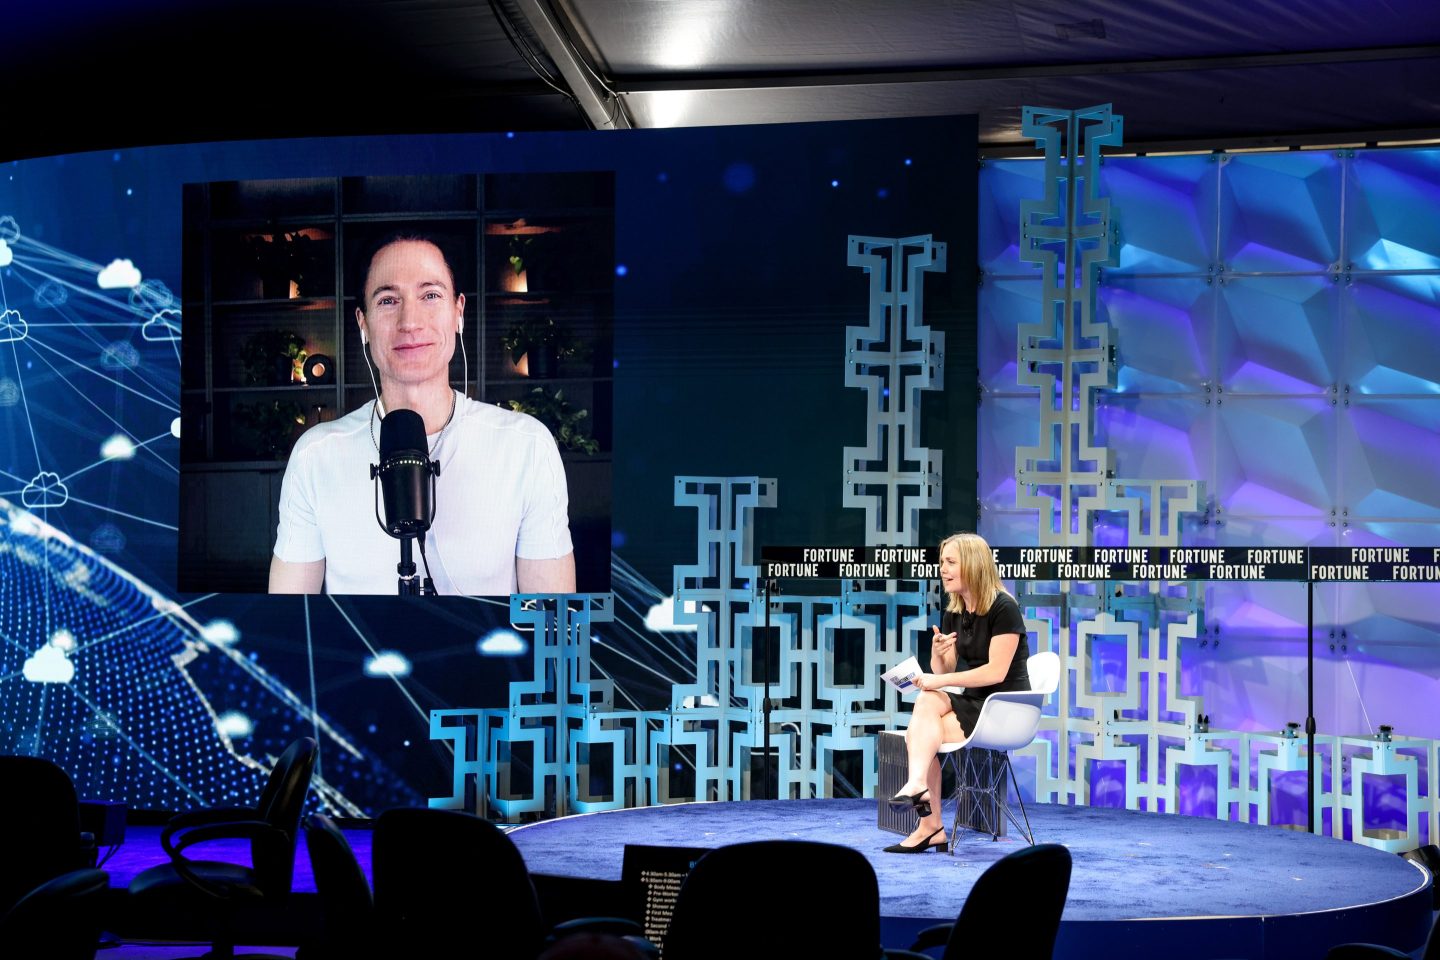 Bryan Johnson, Founder and CEO, Blueprint, Kernel, OS Fund (appearing virtually) In conversation with: Alyson Shontell,